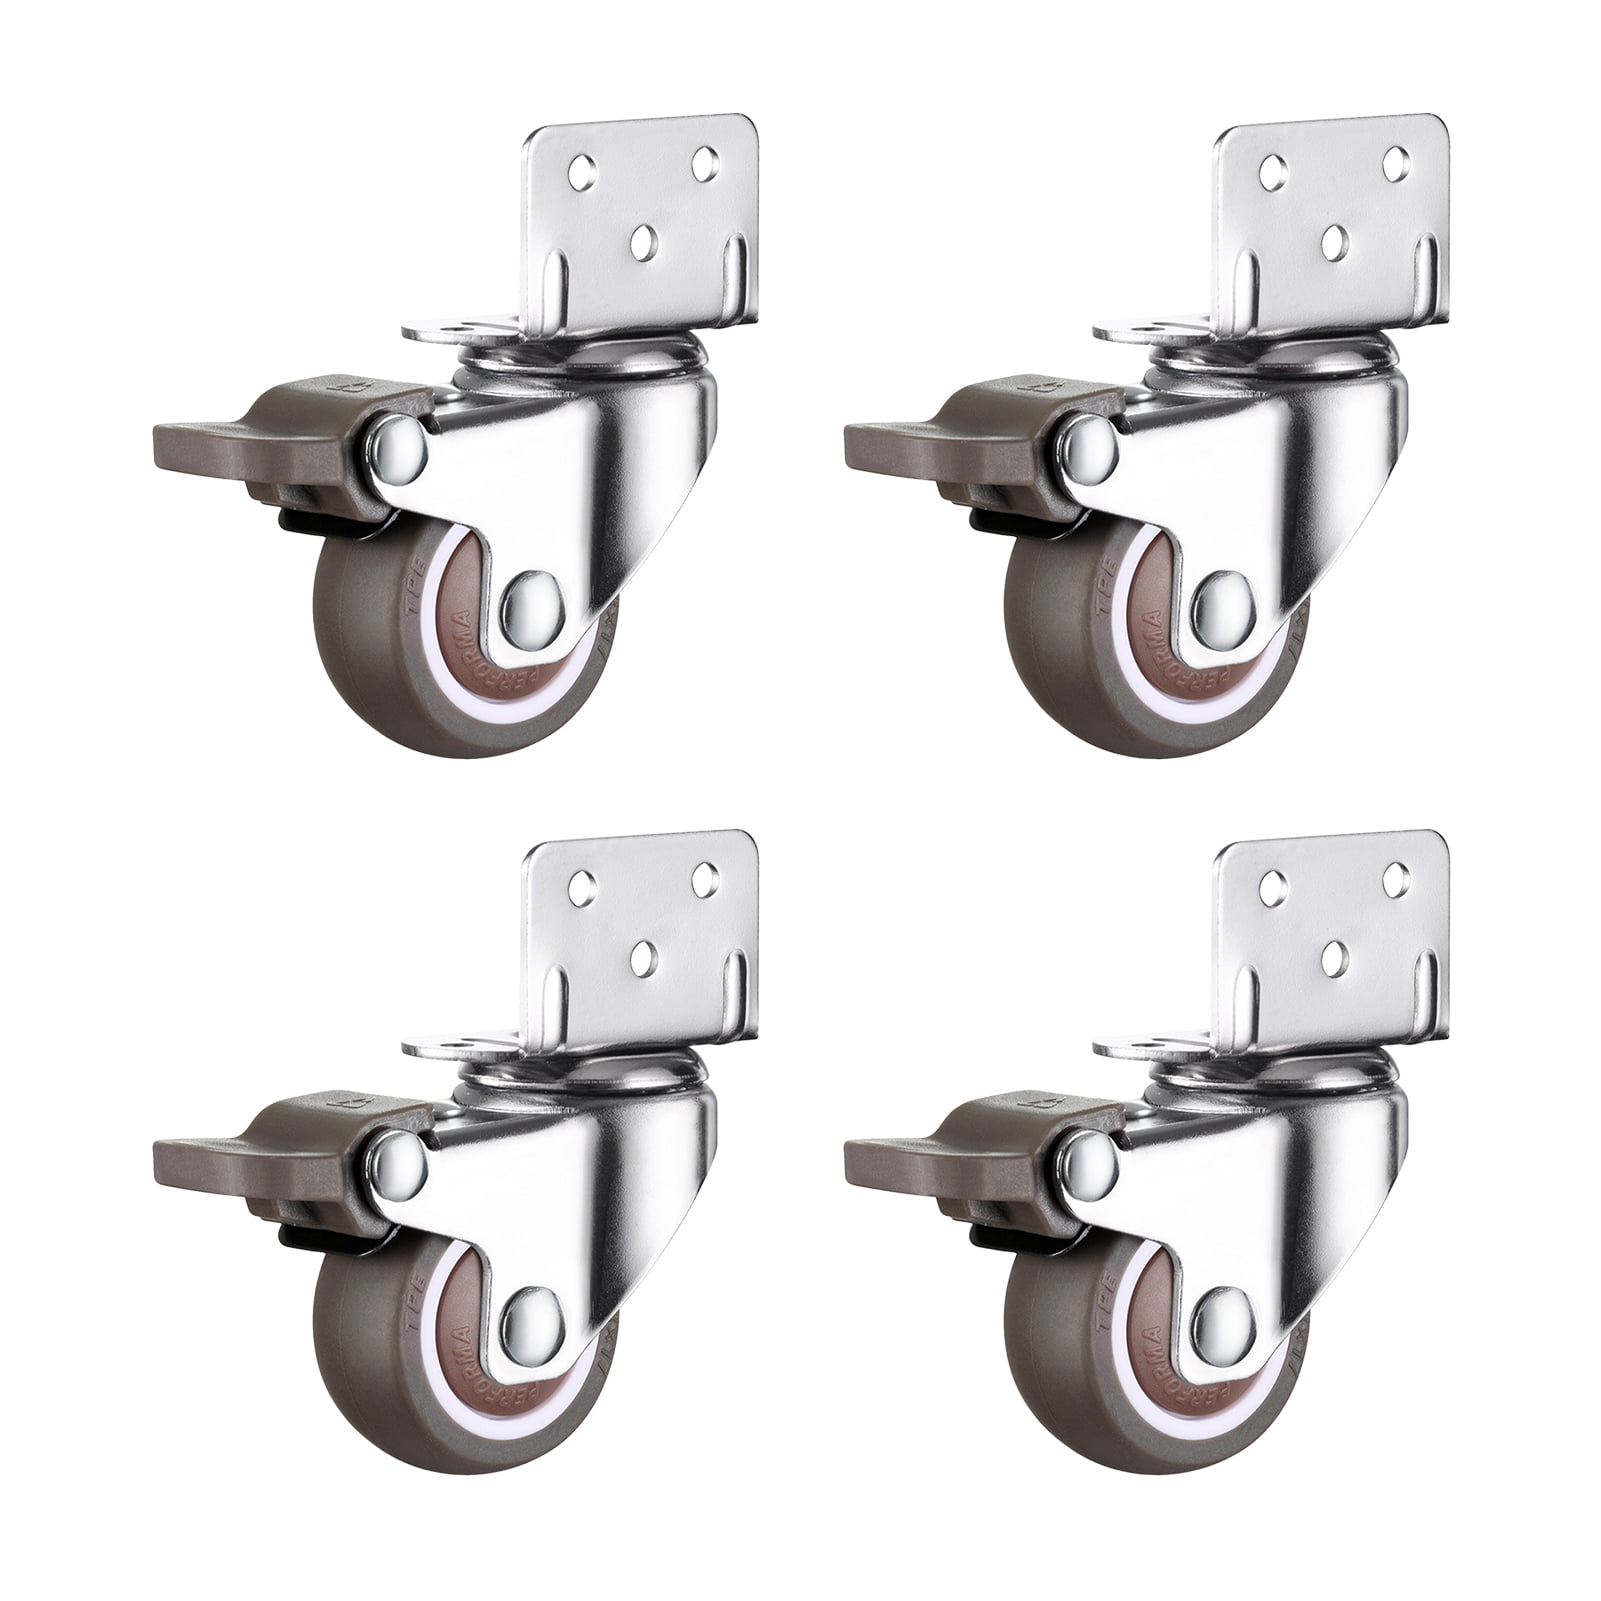 4Pcs 1 inch Furniture Rubber Silent Casters Universal Wheel Rotating Top Plate 